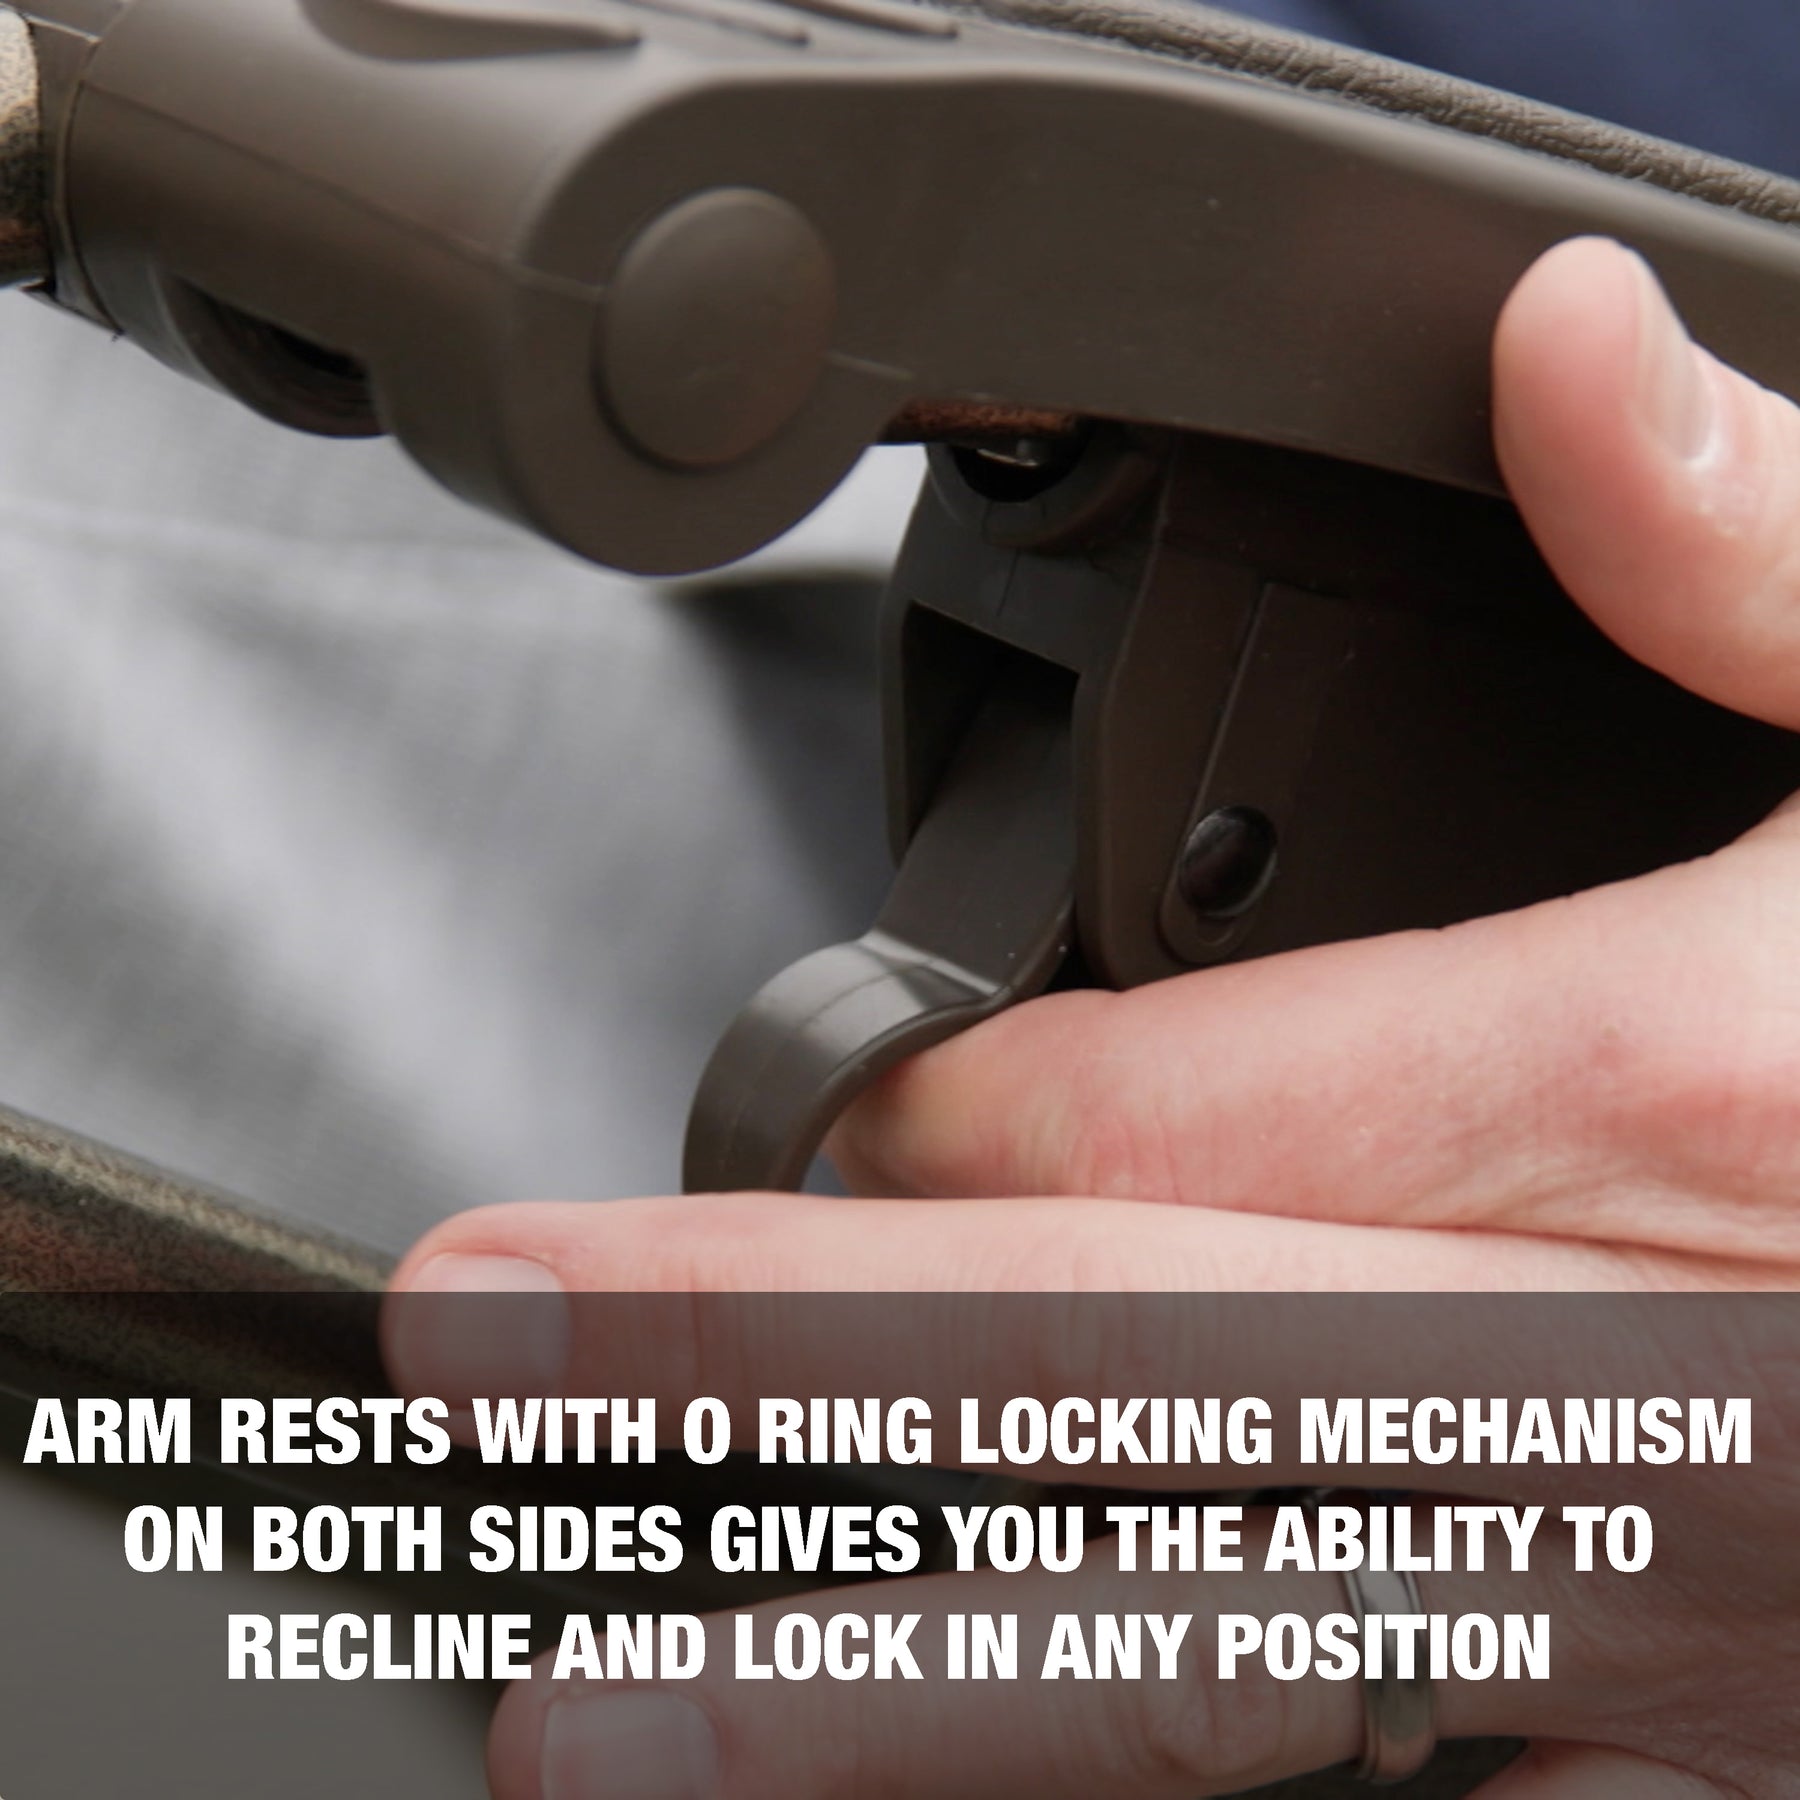 Arm rests with O-ring locking mechanism on both sides gives you the ability to recline and lock in any position.